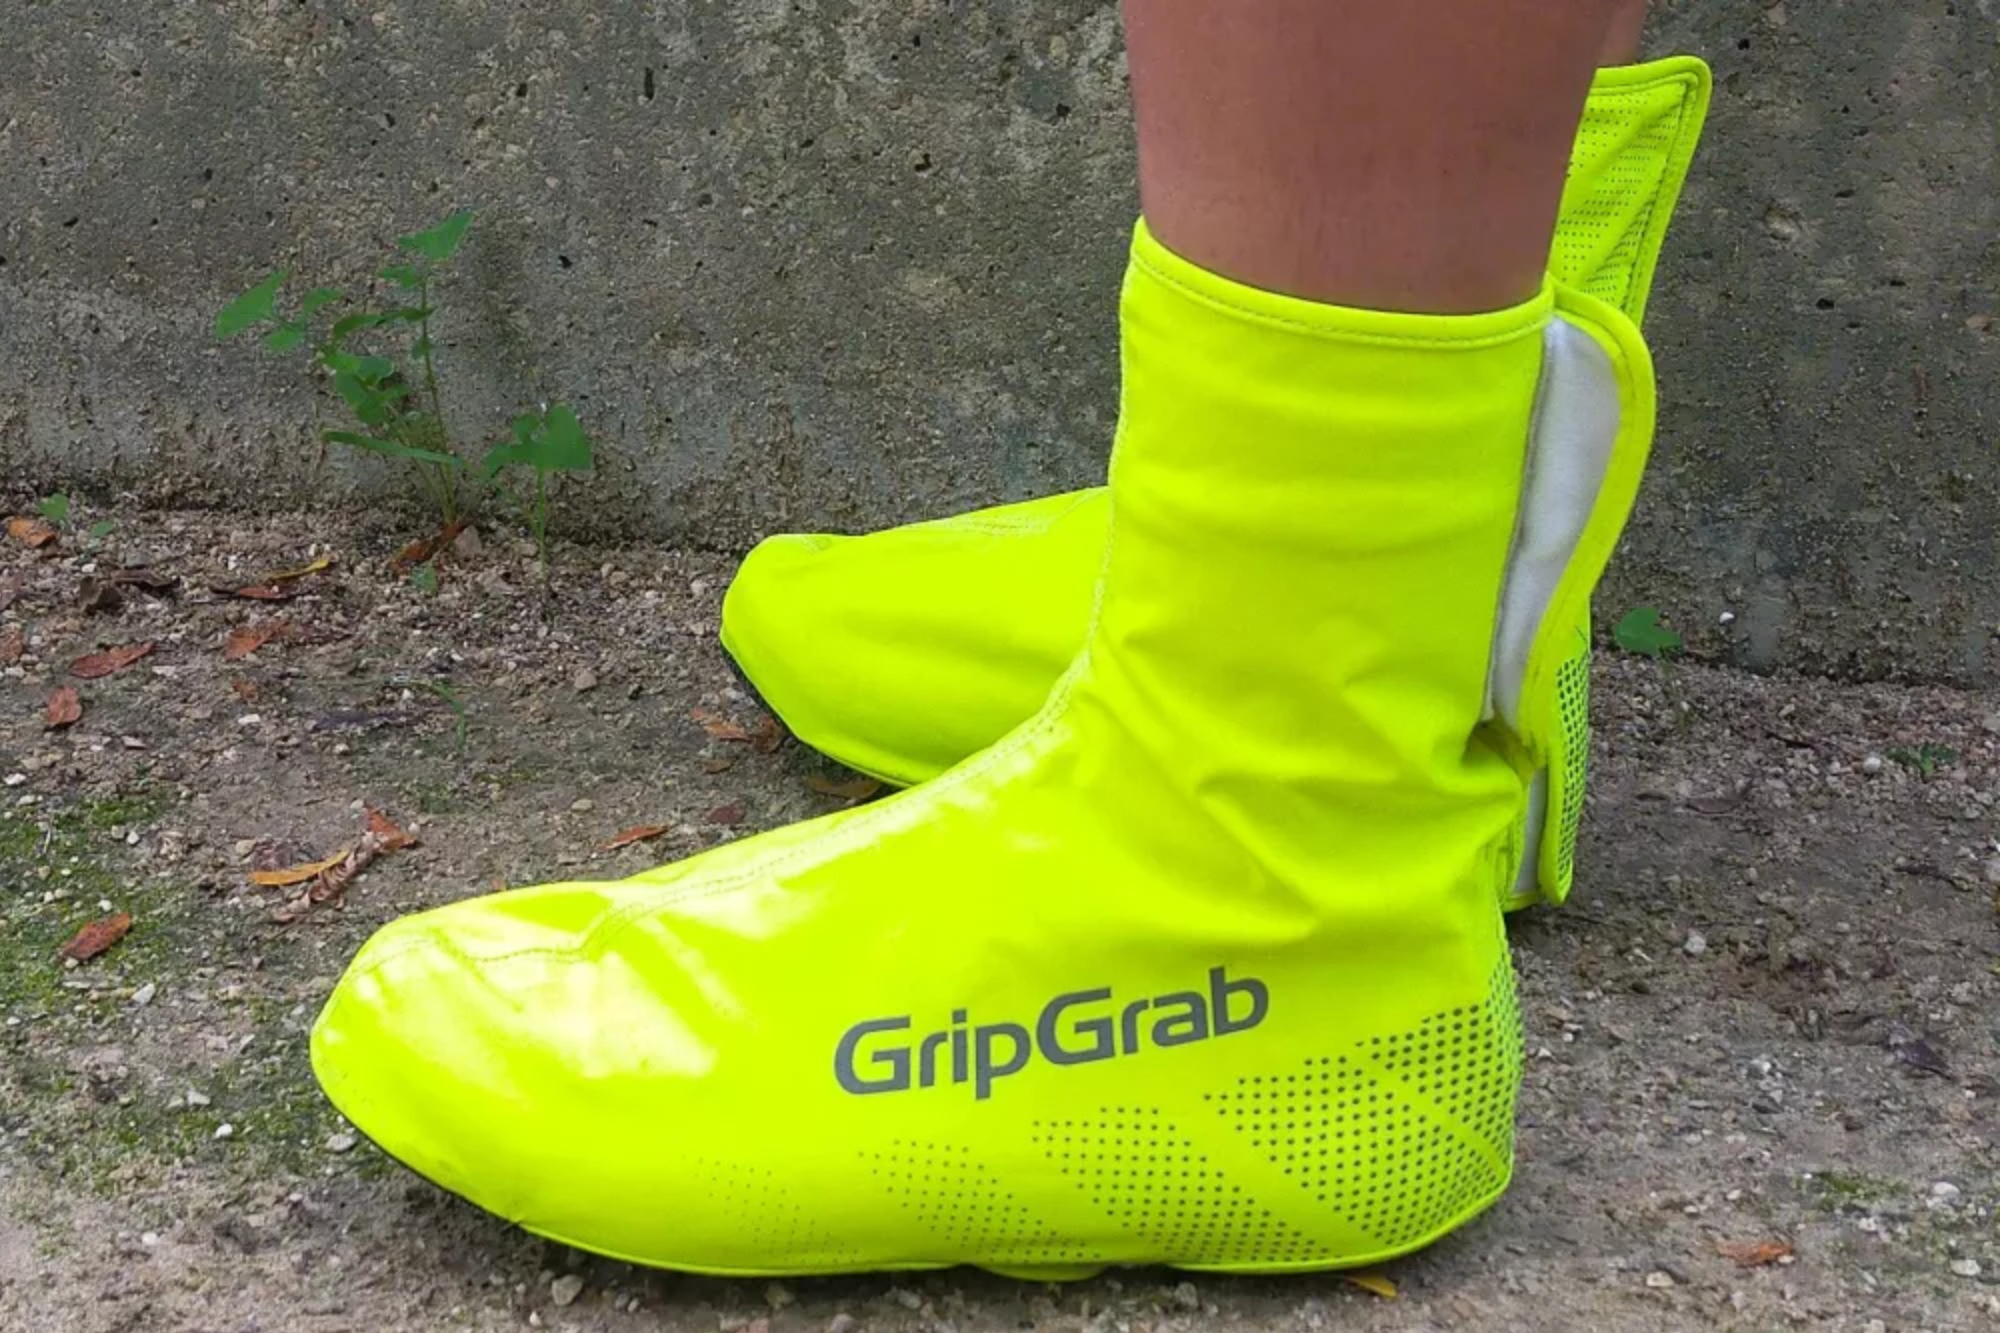 Image shows a rider wearing the GripGrab Ride Waterproof shoe covers.